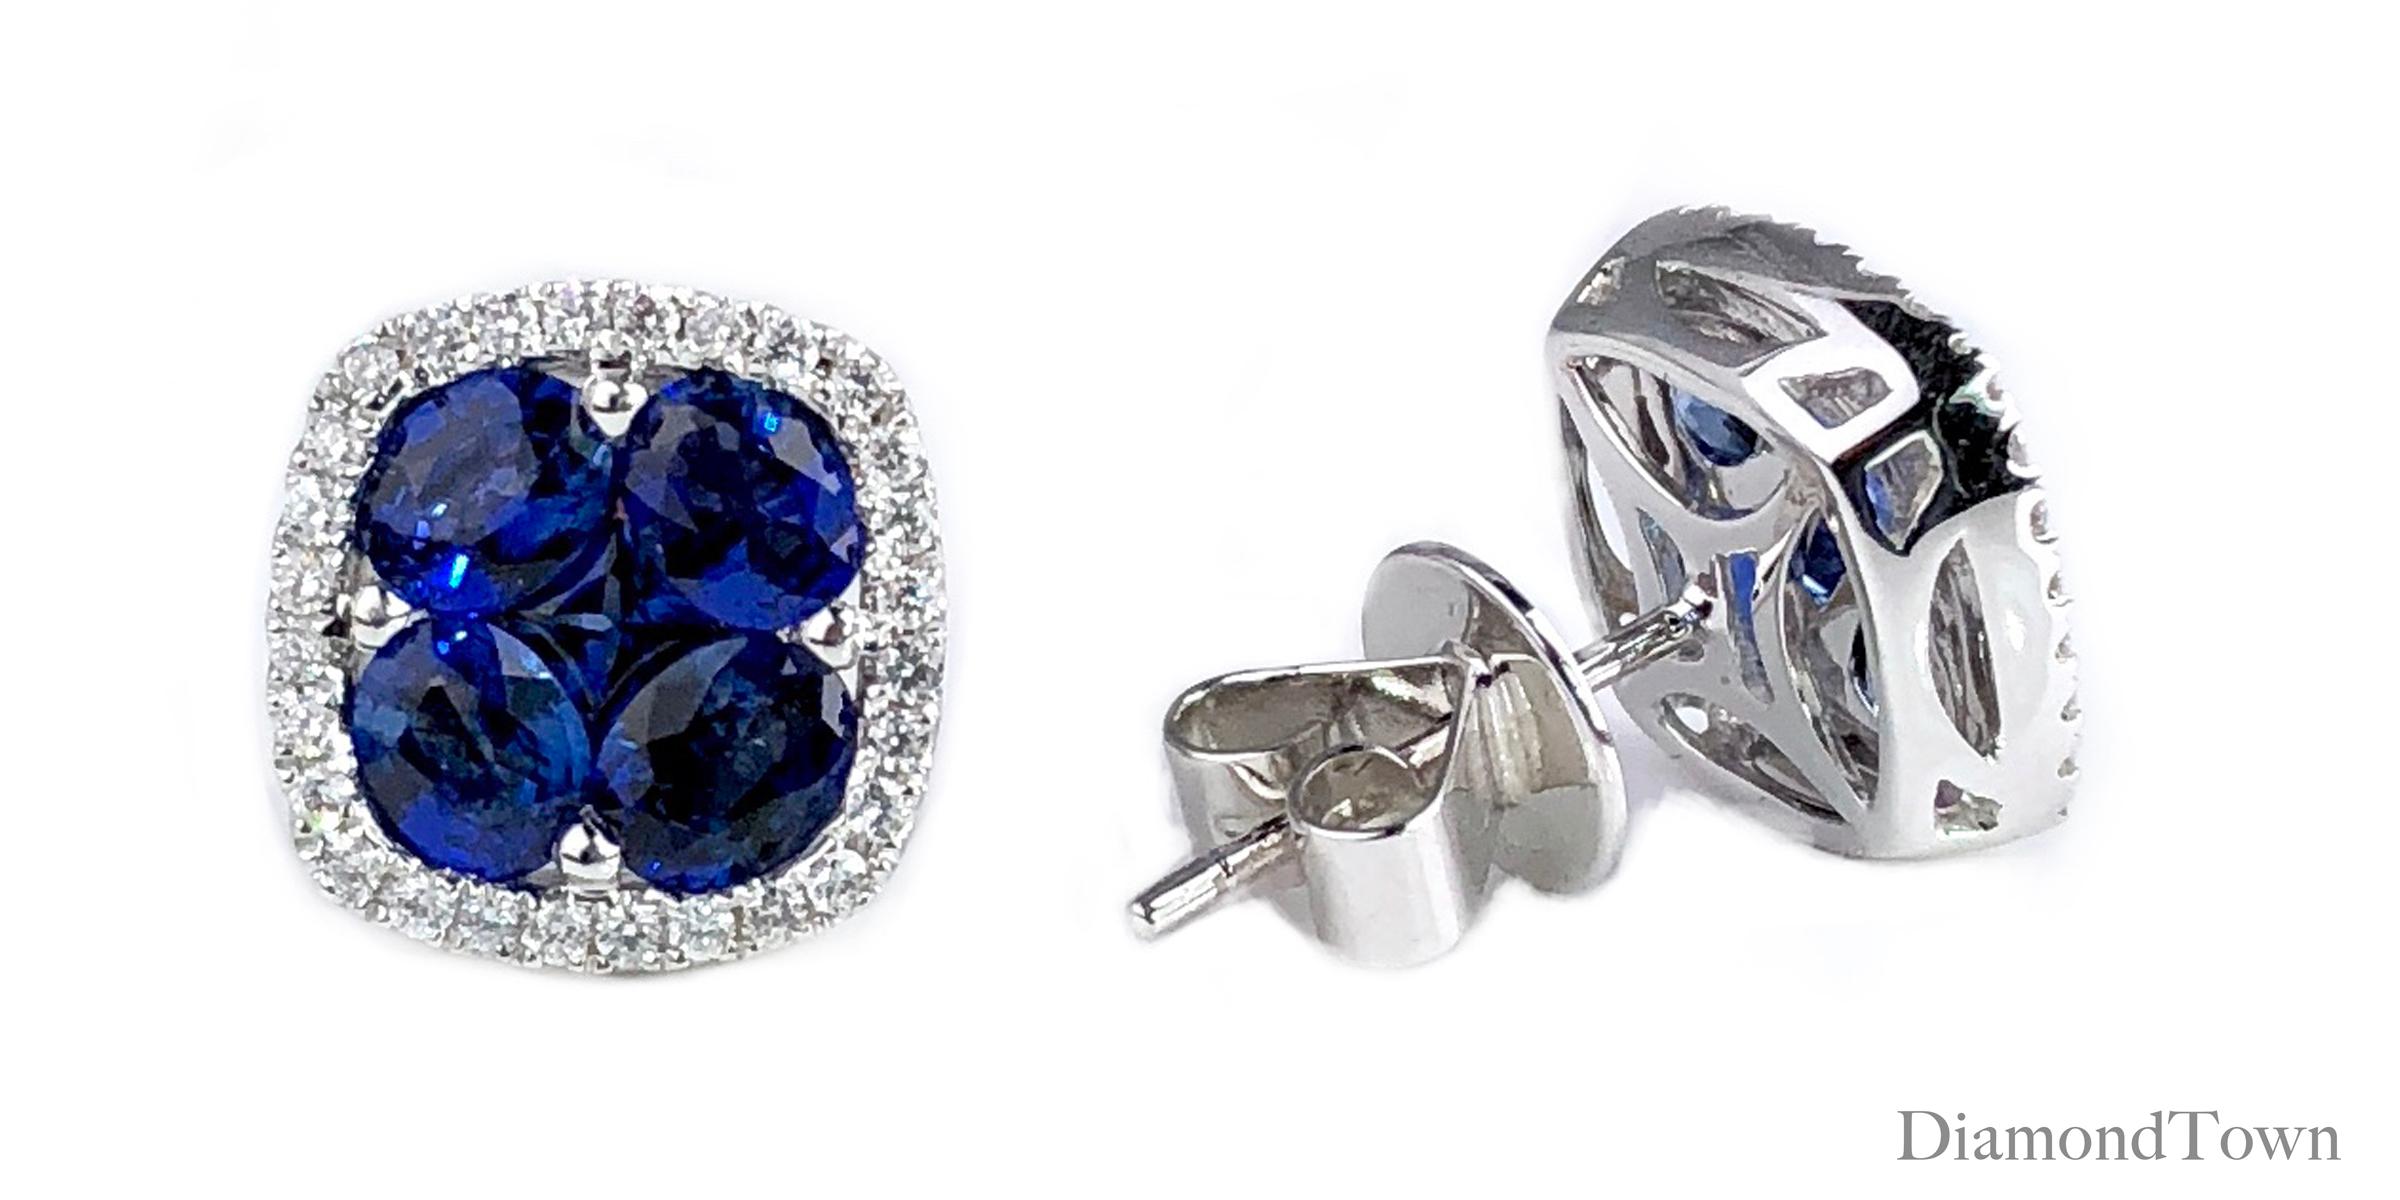 (DiamondTown) These stud earrings feature a cluster center of blue sapphires (five stones per earring, total weight 2.65 carats) surrounded by a halo of round white diamonds (total diamond weight 0.26 carats), set in 18k white gold.

A matching